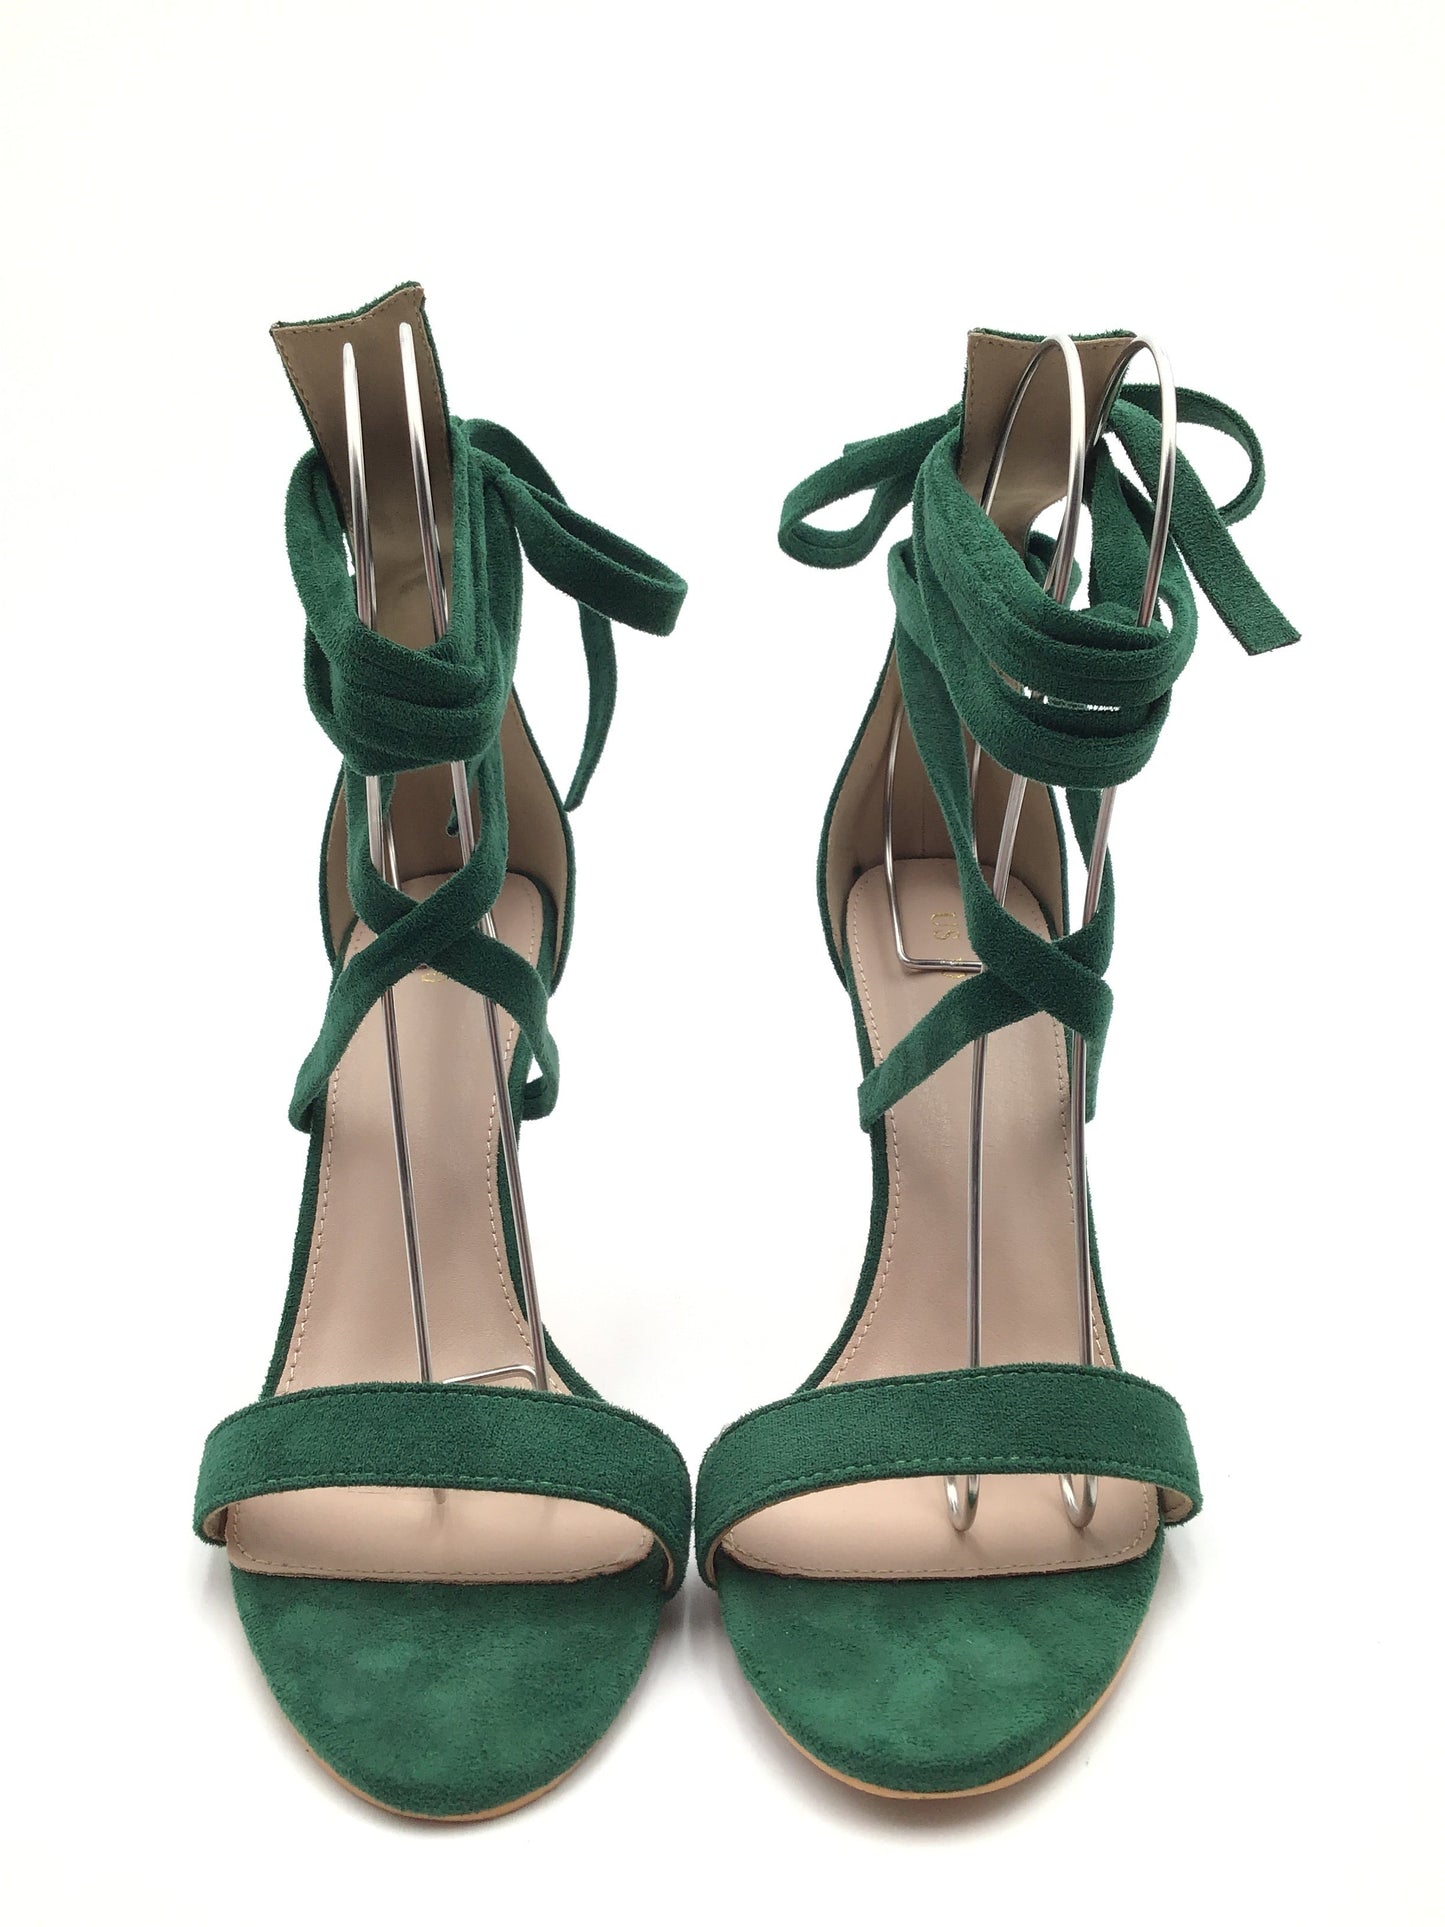 Green Sandals Heels Stiletto Clothes Mentor, Size 10